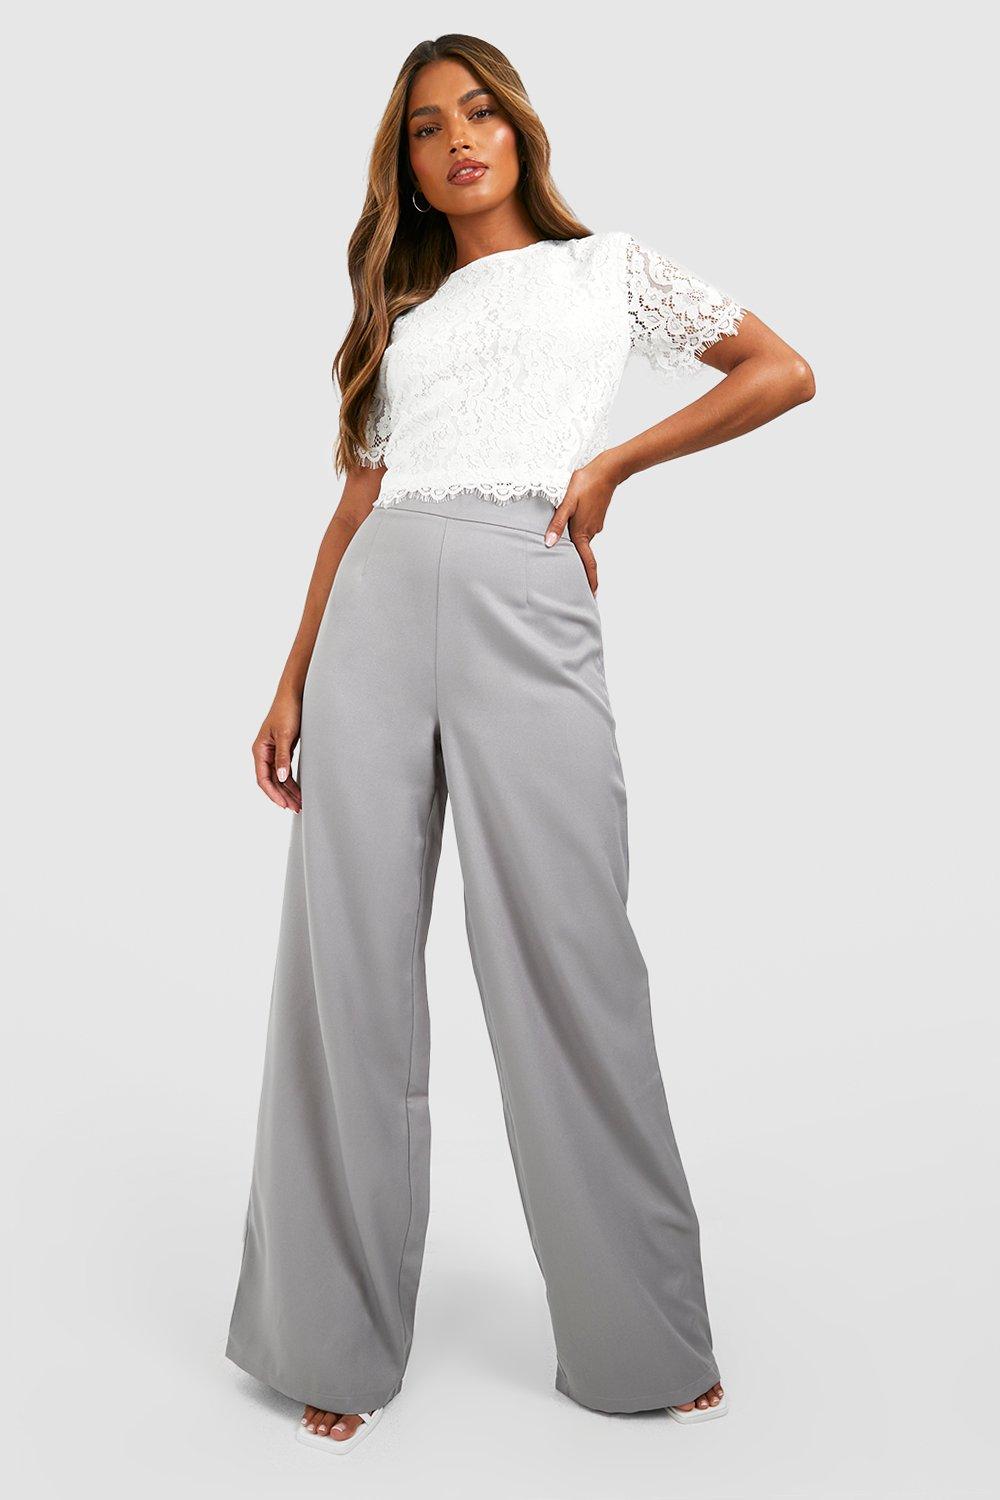 Shop Missguided Women's Lace Beach Trousers up to 50% Off